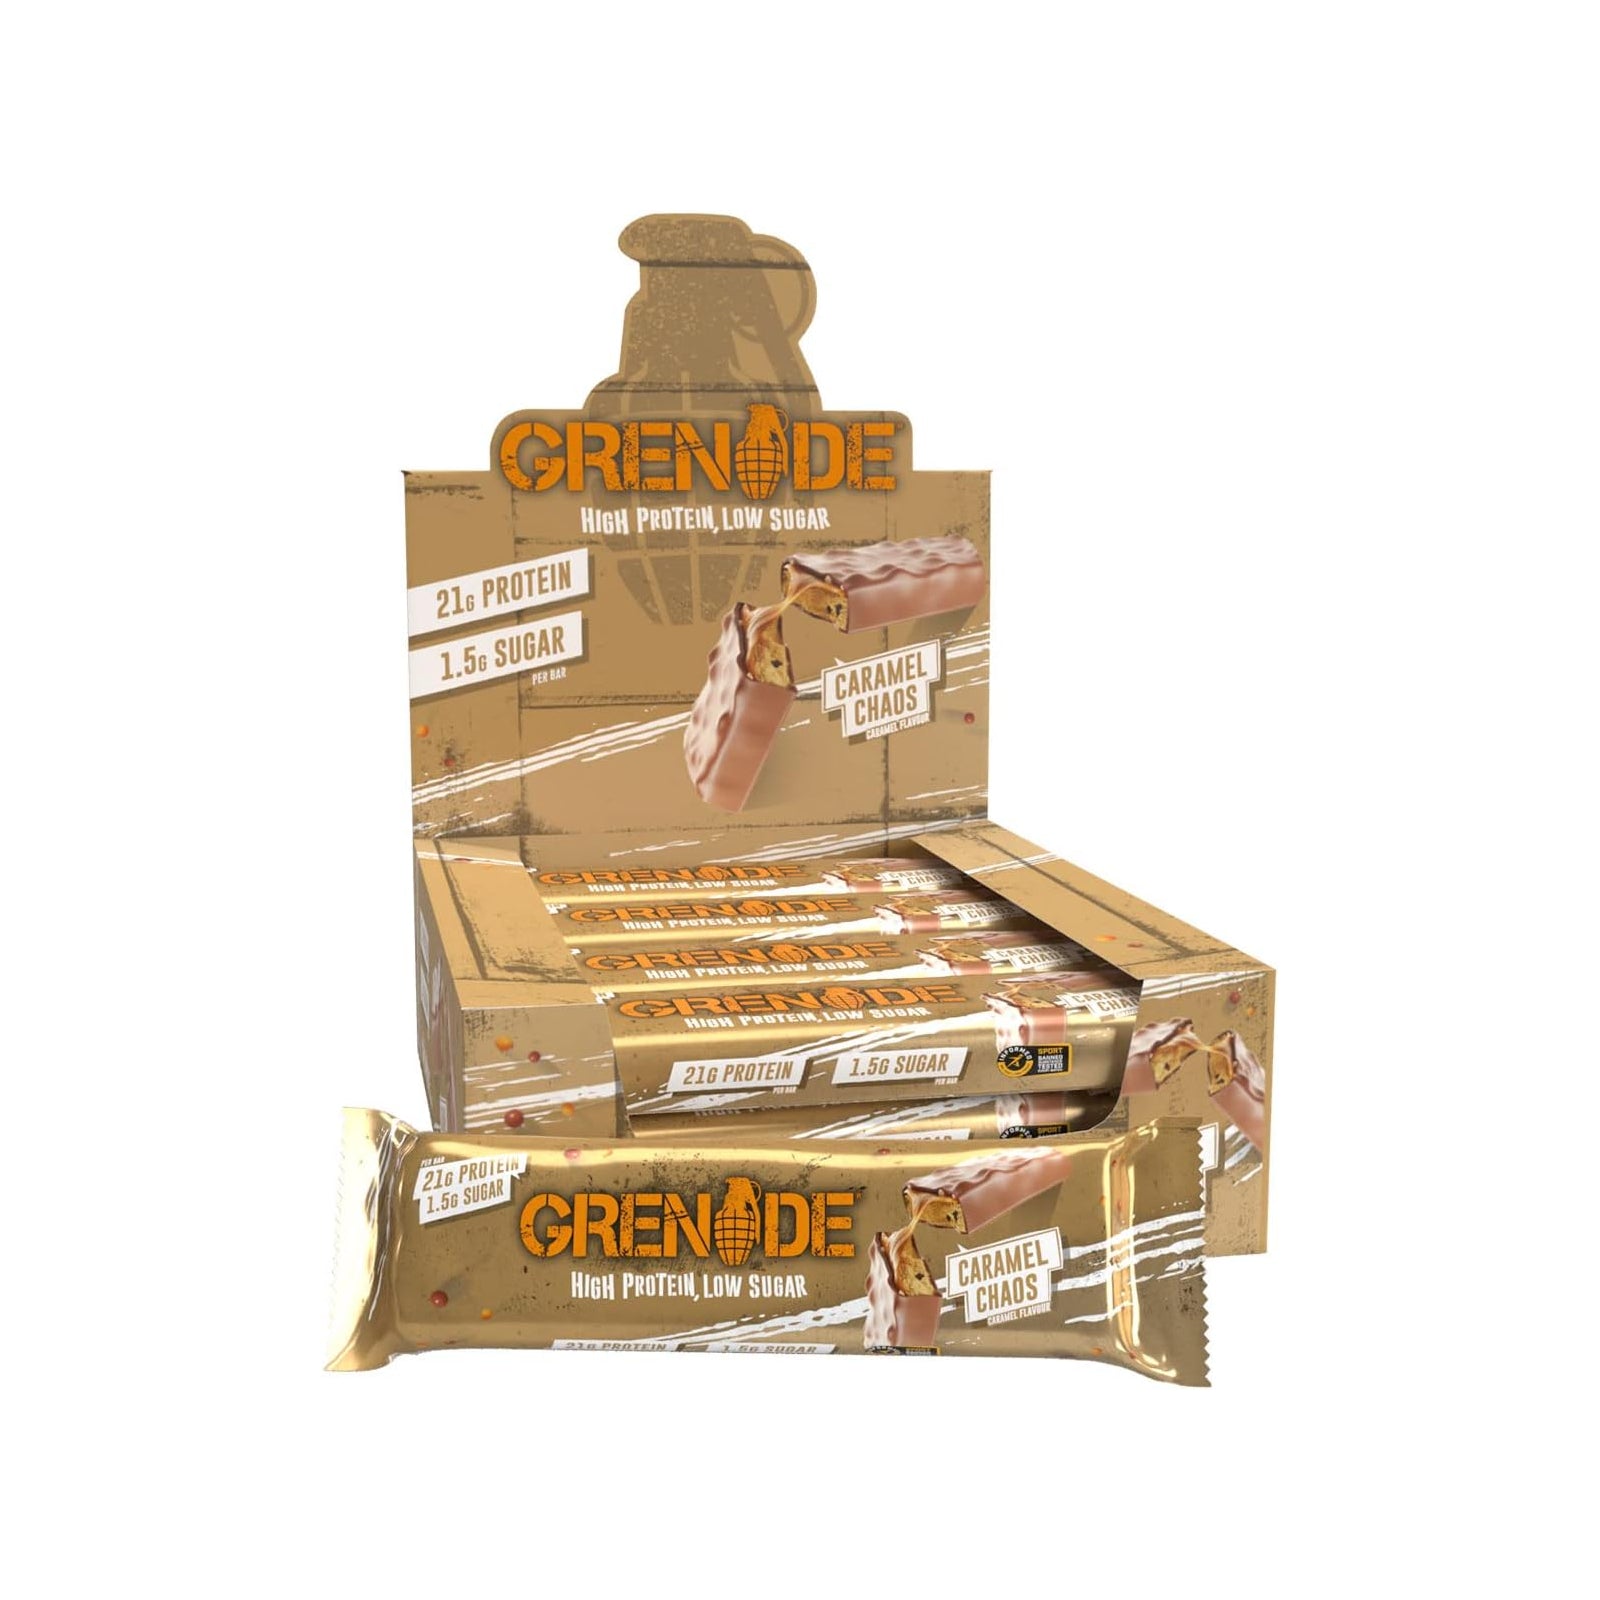 Grenade Protein Bars Caramel Chaos / Pack of 12